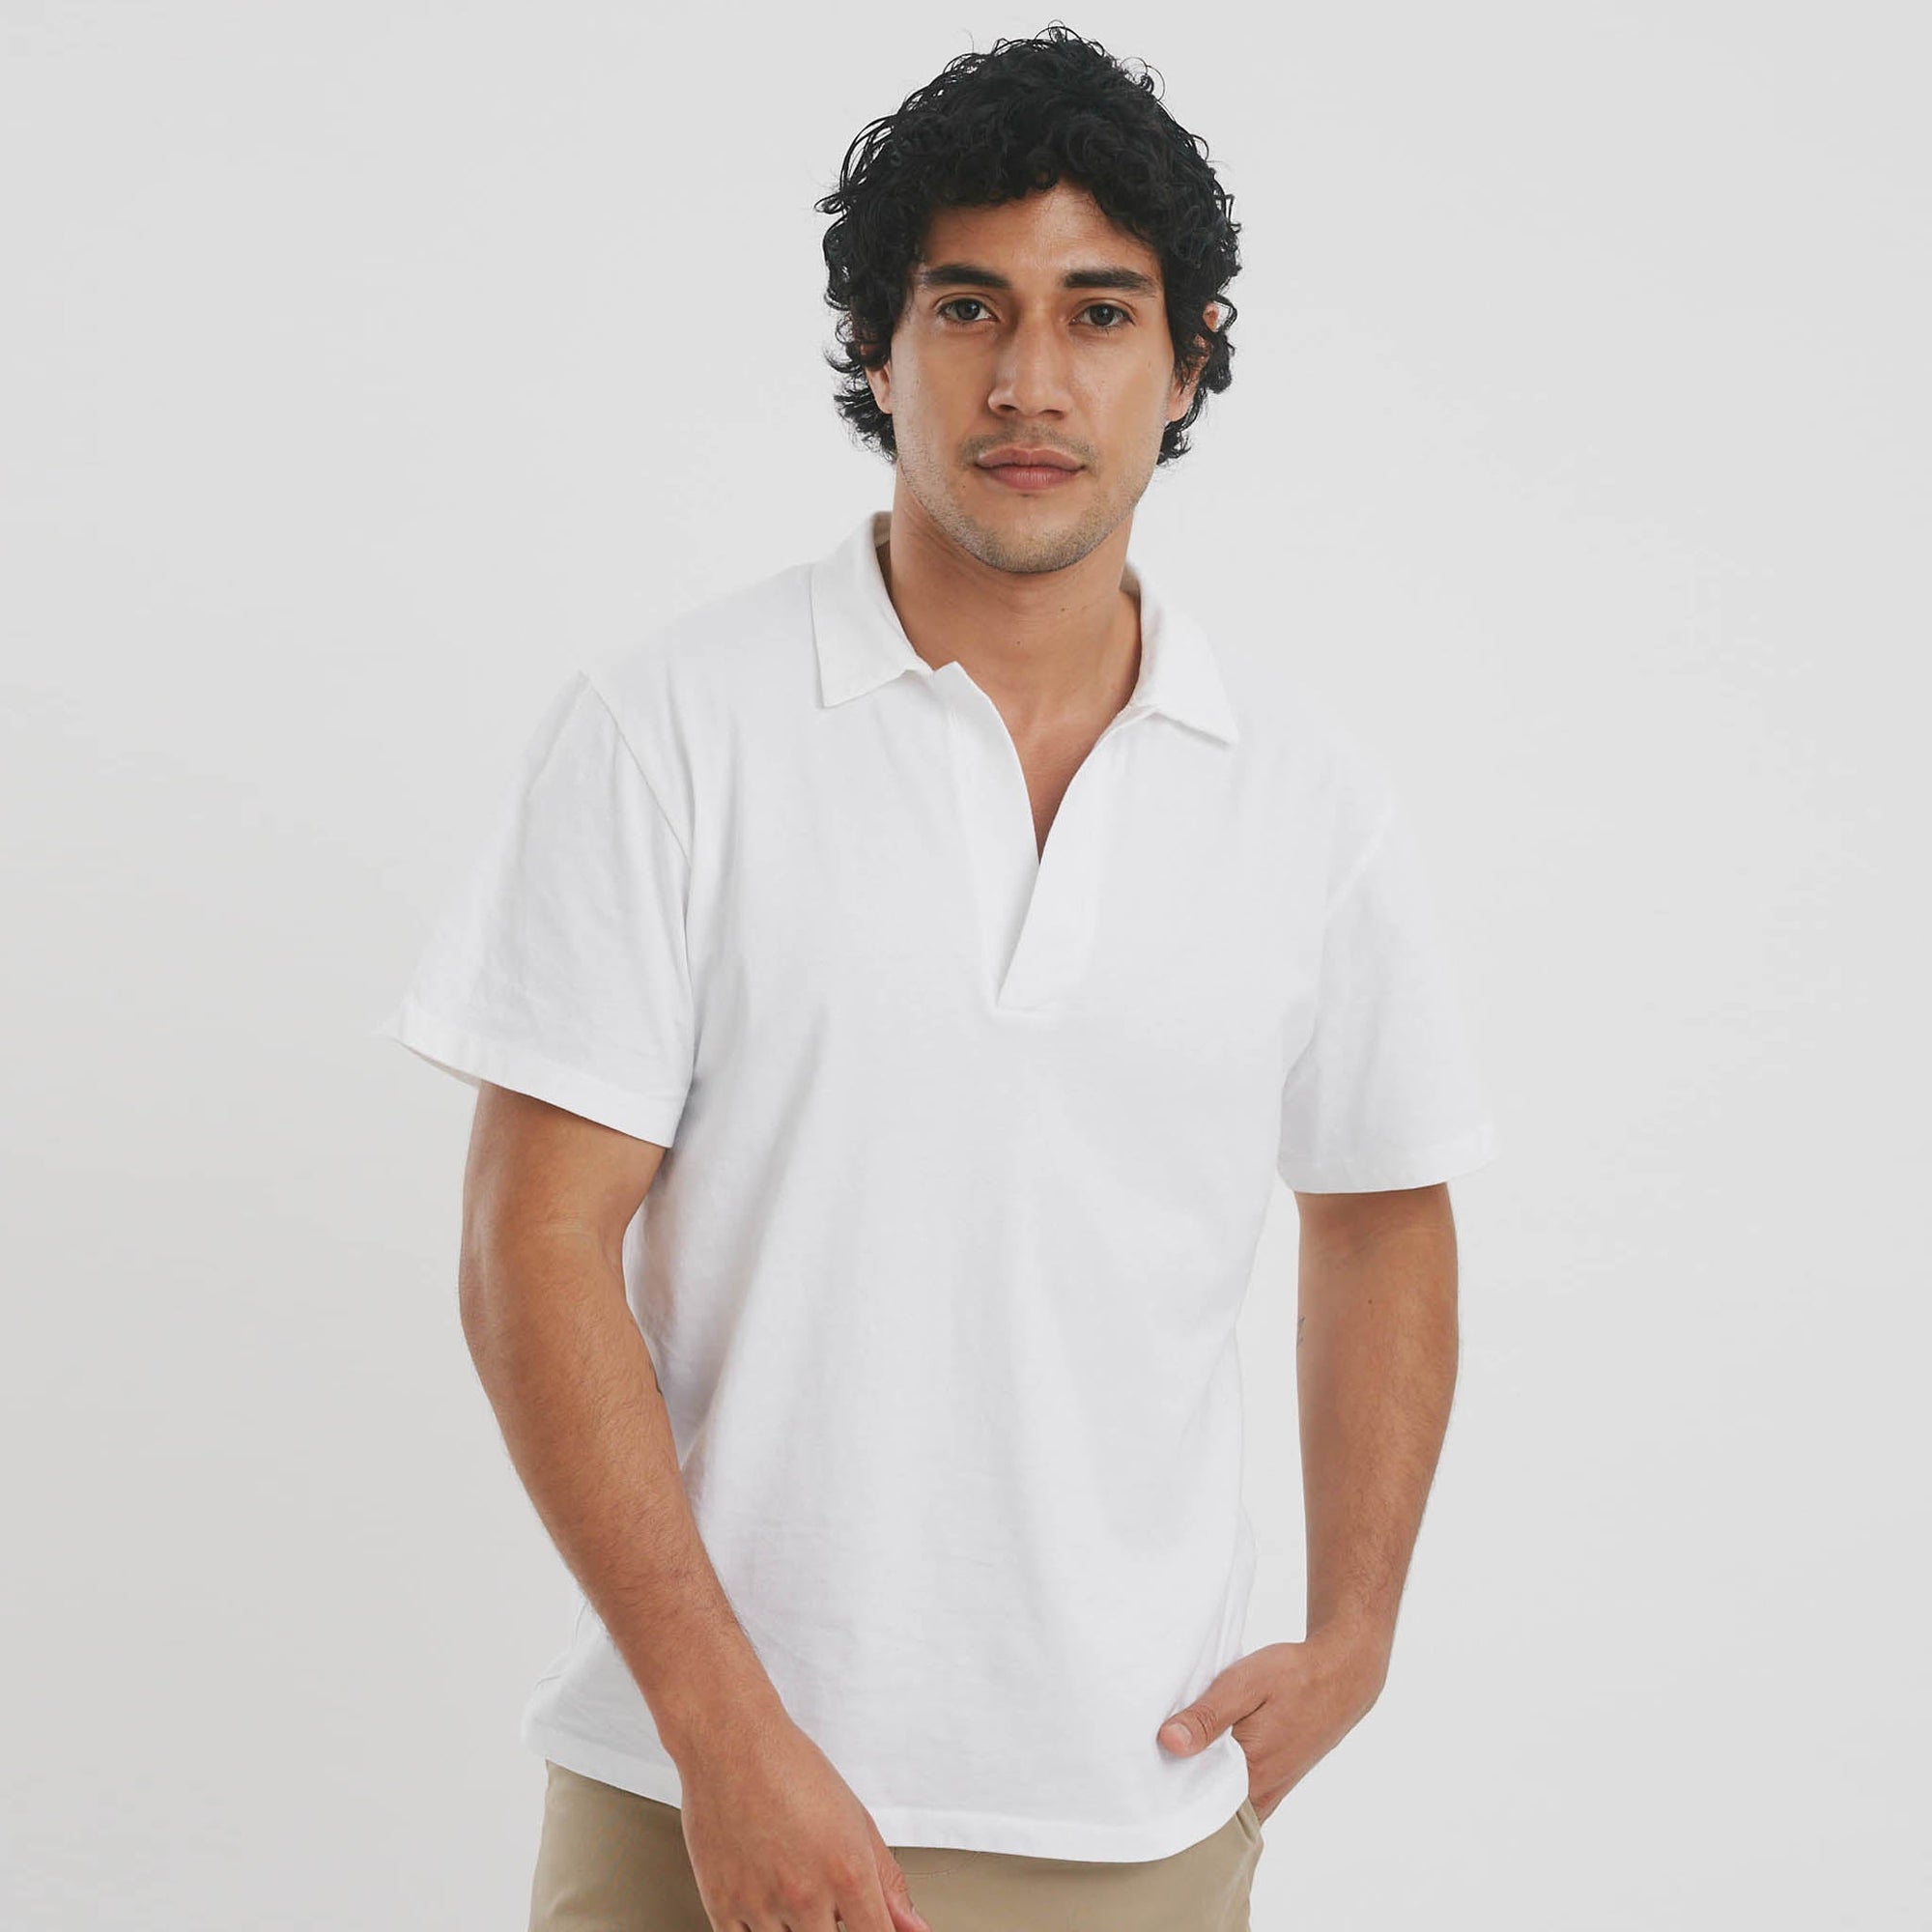 The Comfy Polo Shirt-Mens. No tags, no lables. The Shapes United.